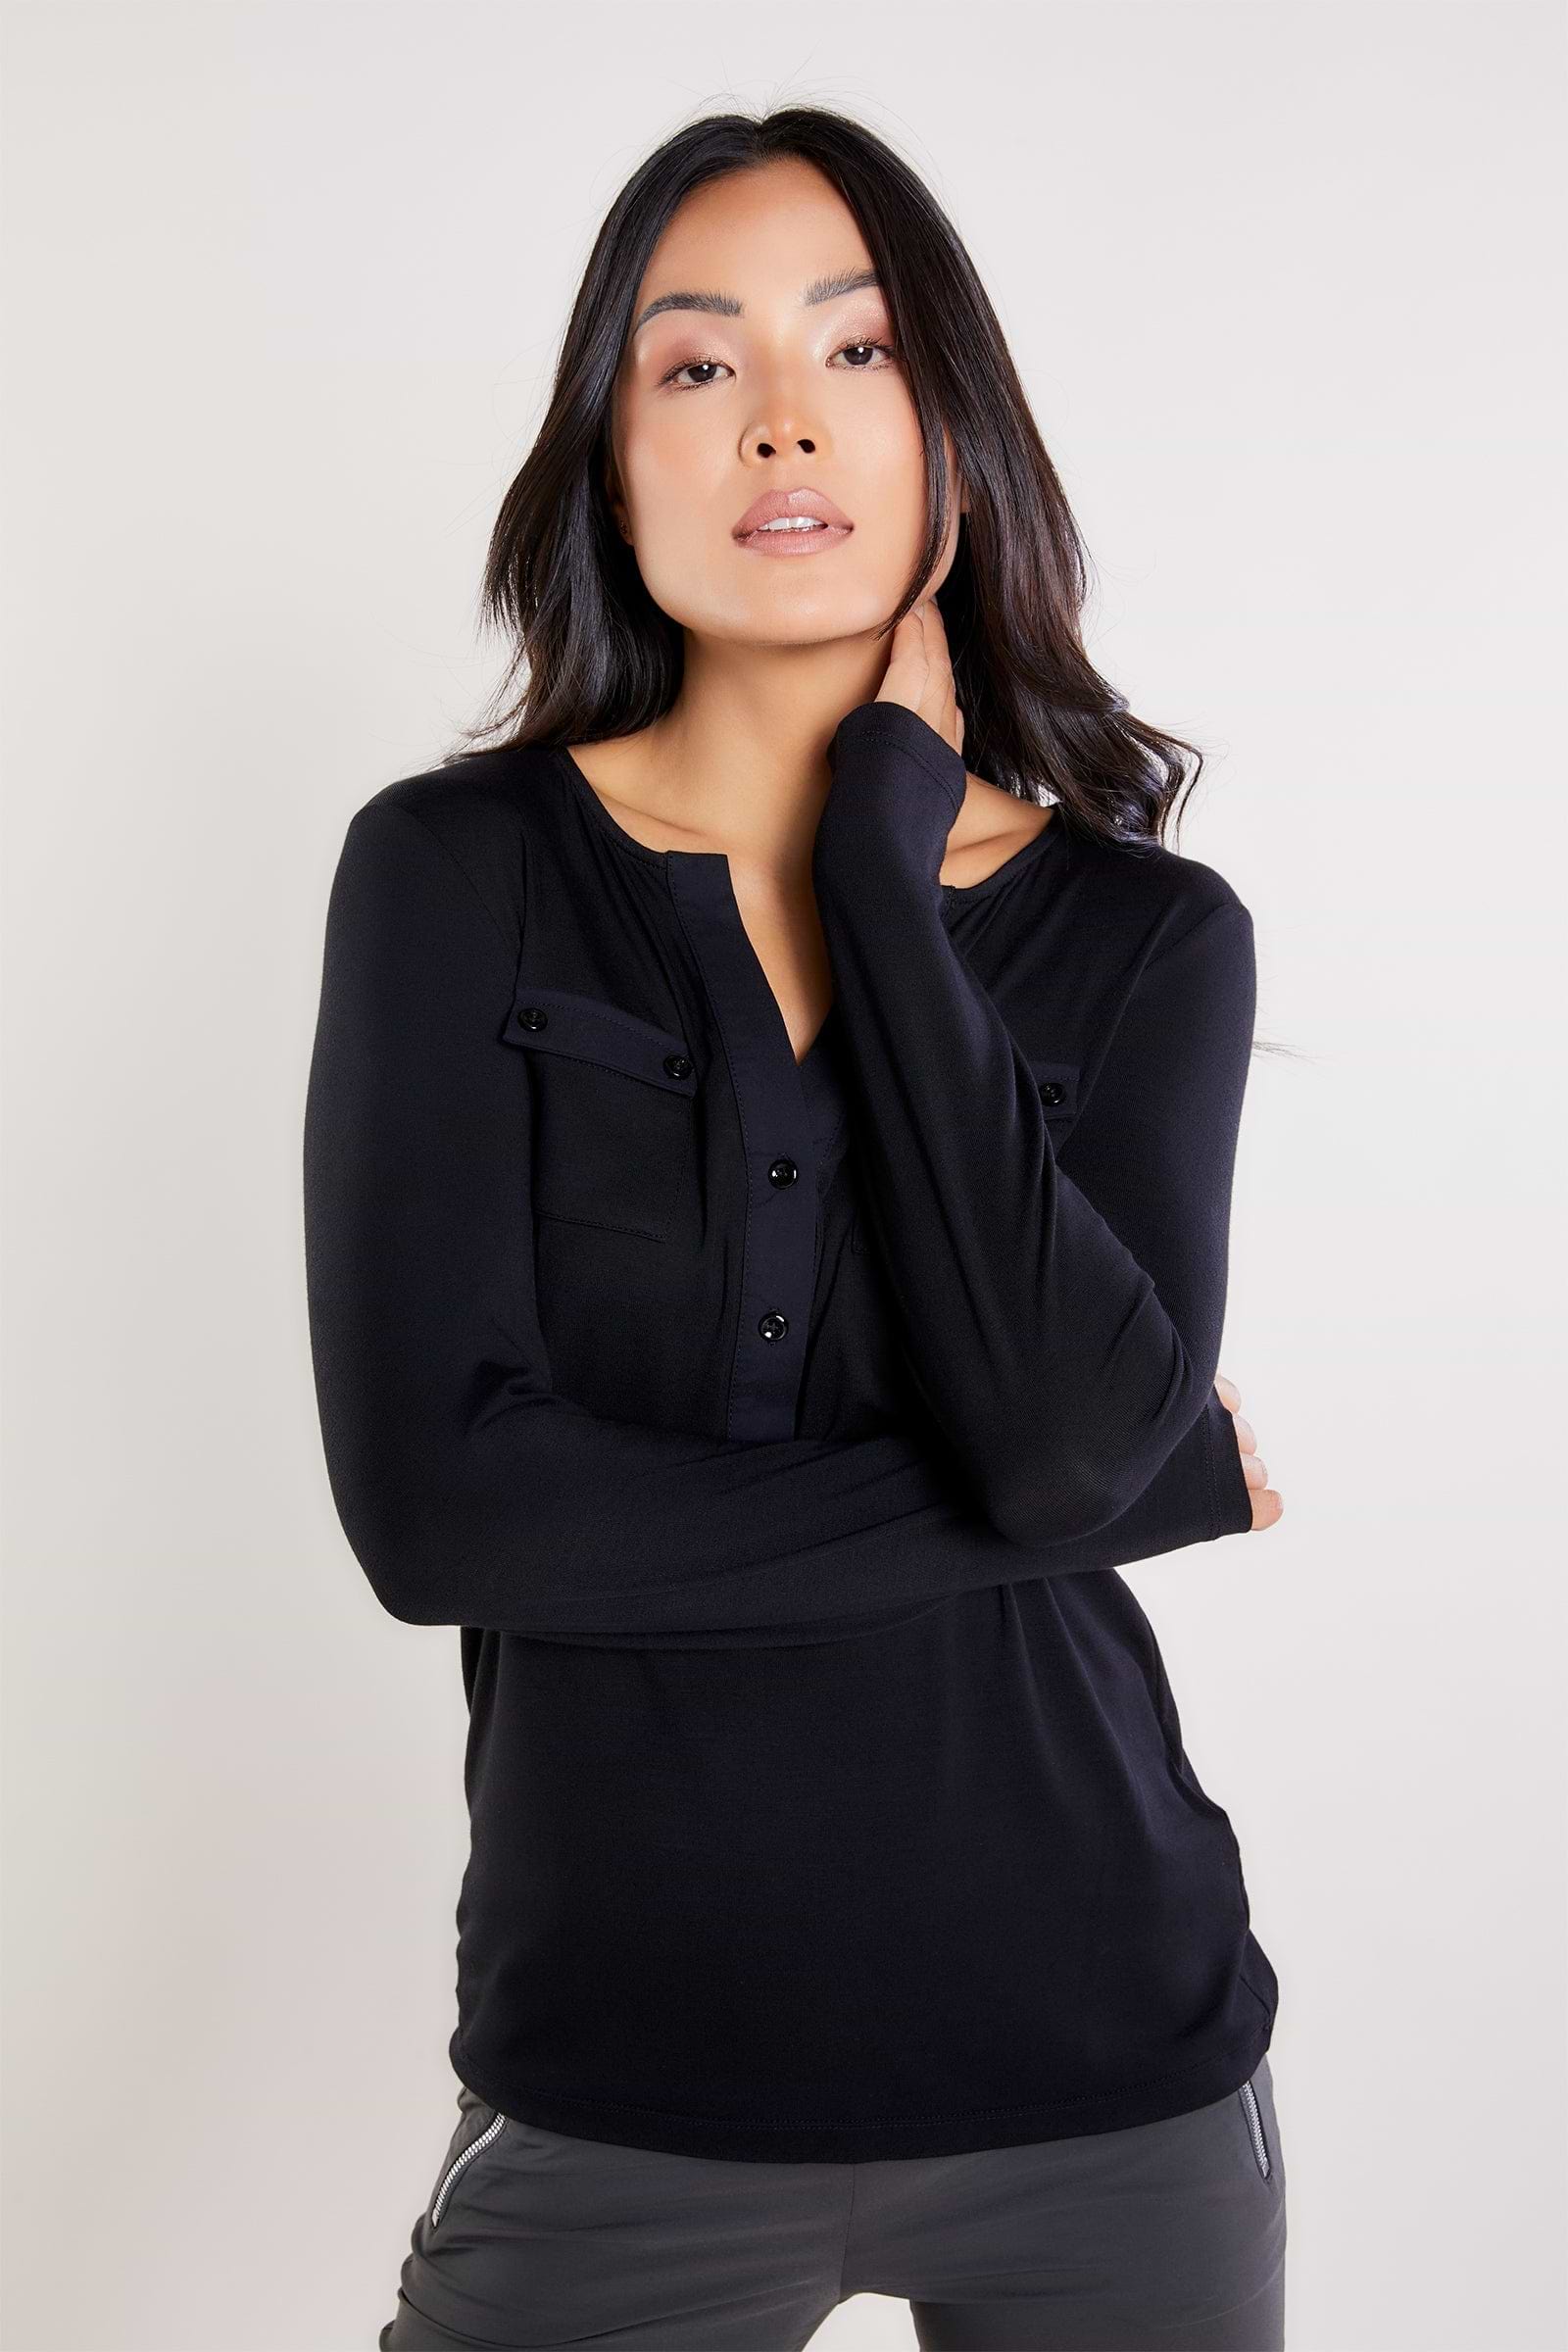 The Best Travel Shirt. Woman Showing the Front Profile of a Calista Roll up Henley Top in Black